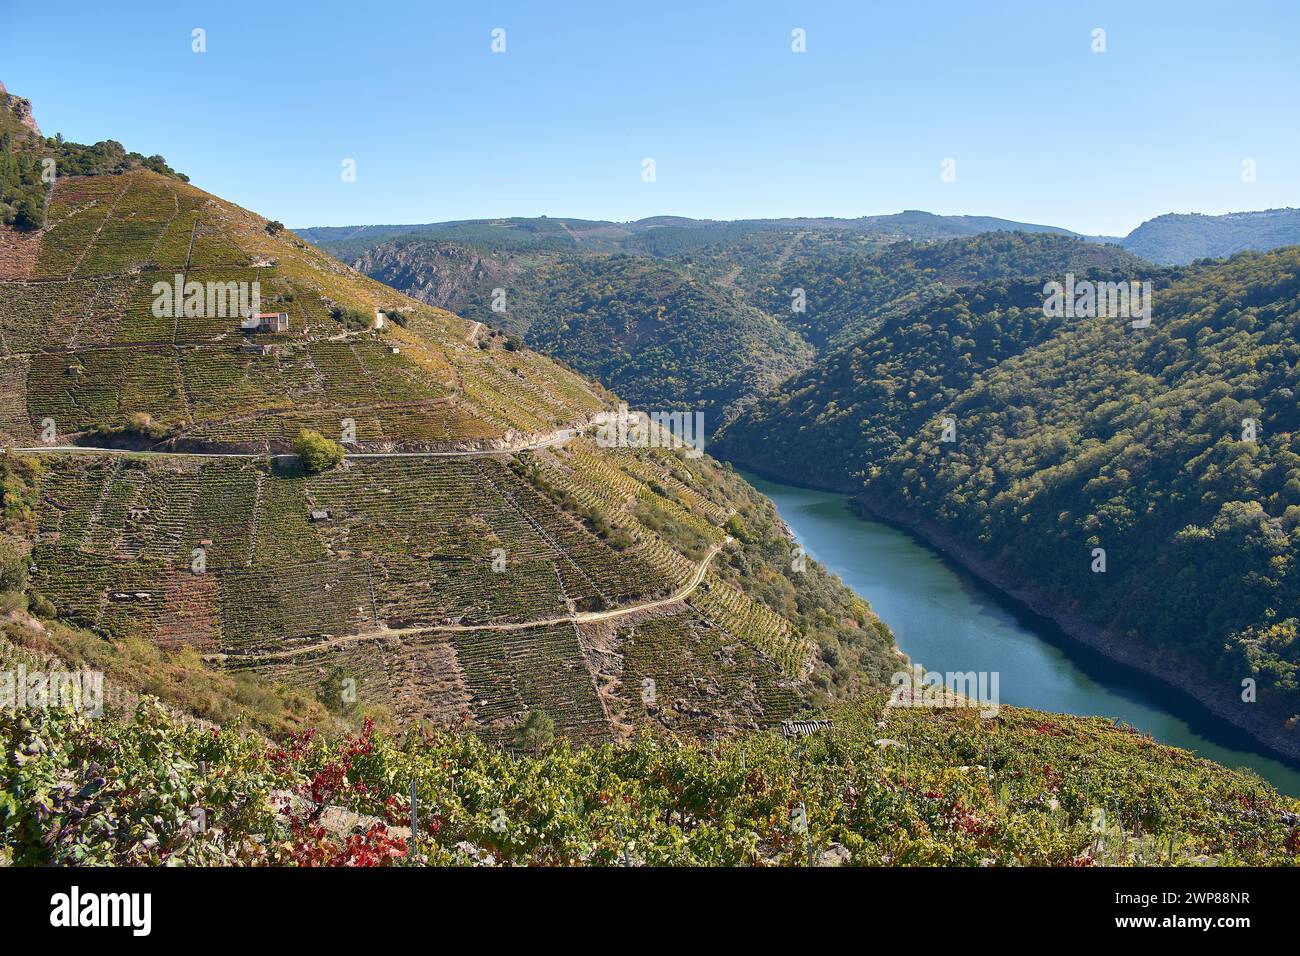 The Viewpoint of the Sil Canyons in Sober, Lugo, Galicia, Spain. Stock Photo